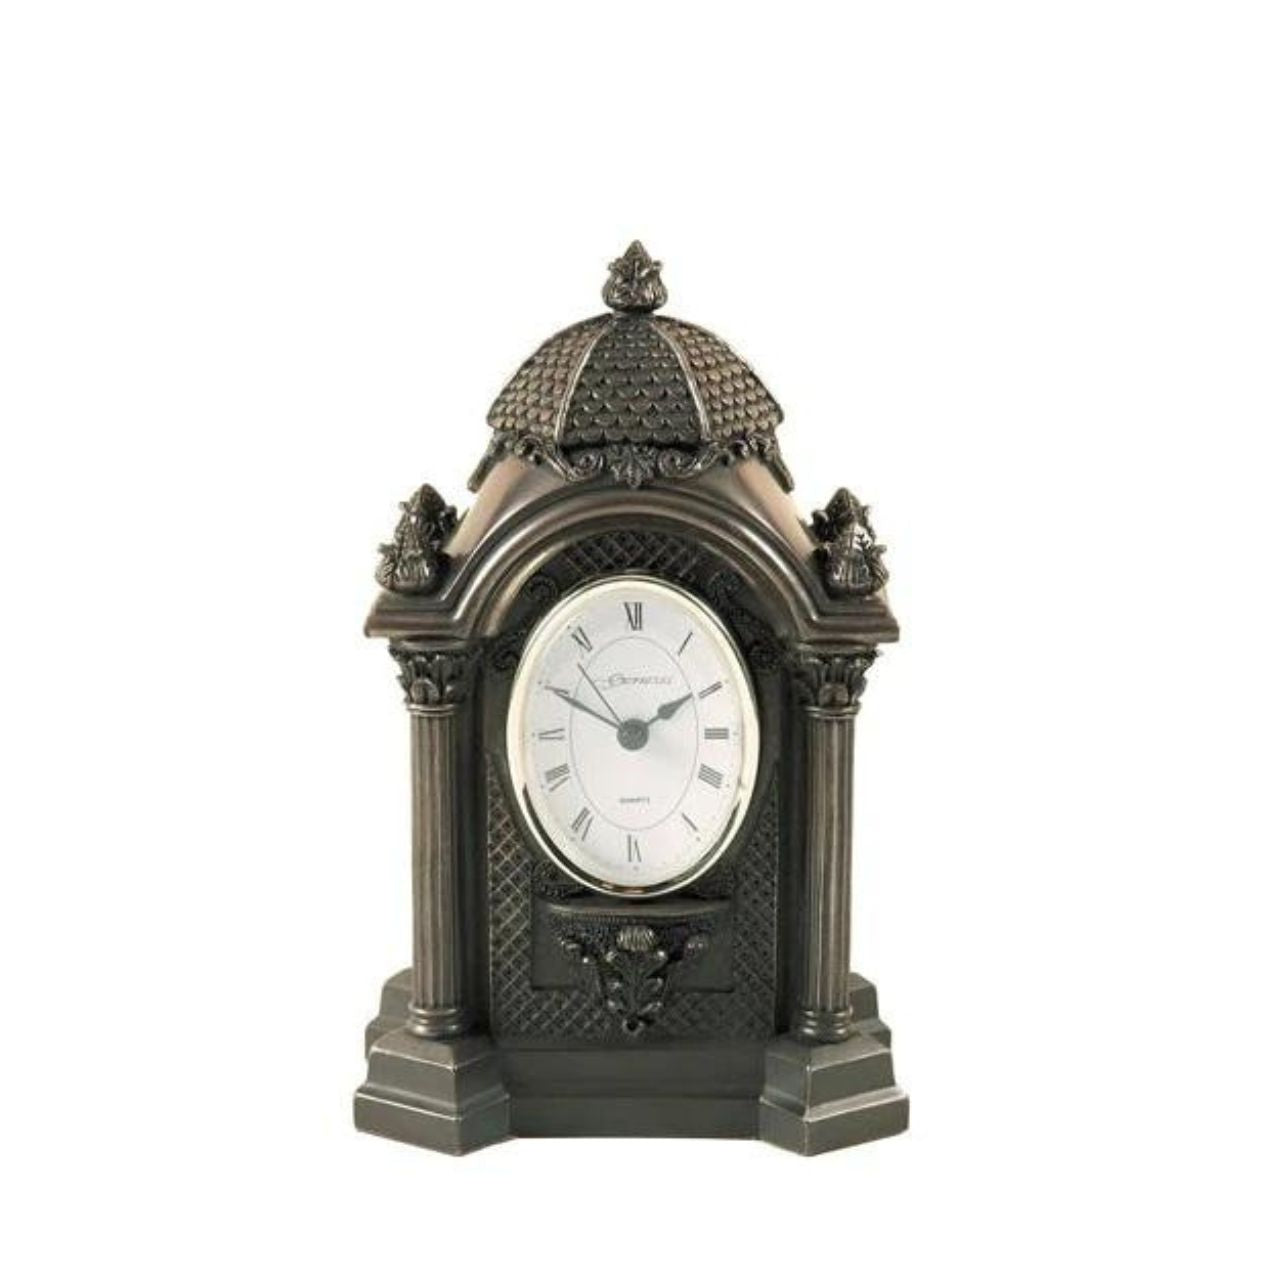 Genesis Oval Clock  This small mantle clock looks great as a center piece with its beautiful delicate detailing on front and back. Suitable gift for any occasion.